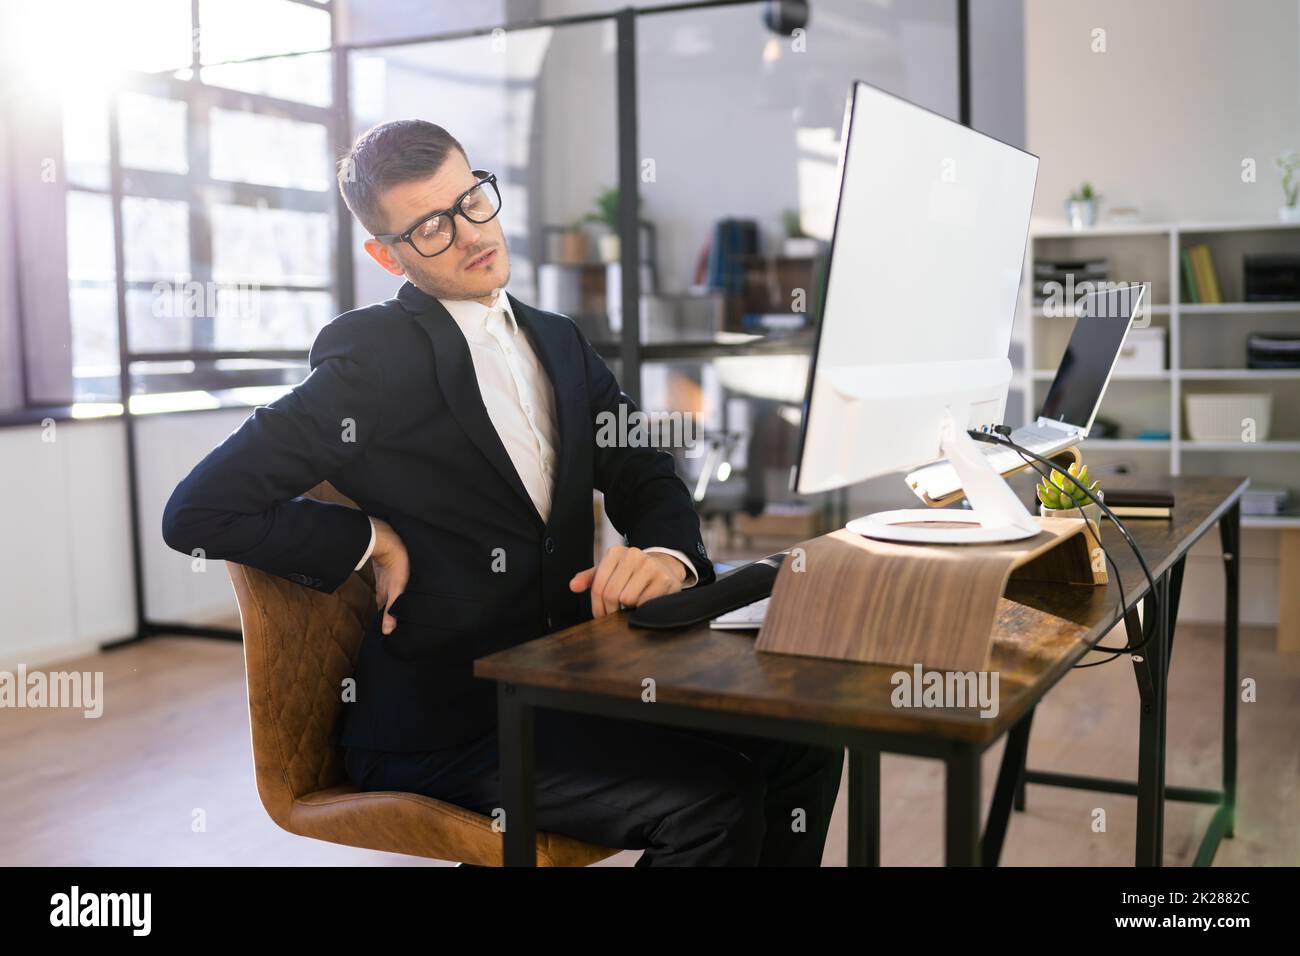 Bad Posture Office Desk Chair Back Stock Photo